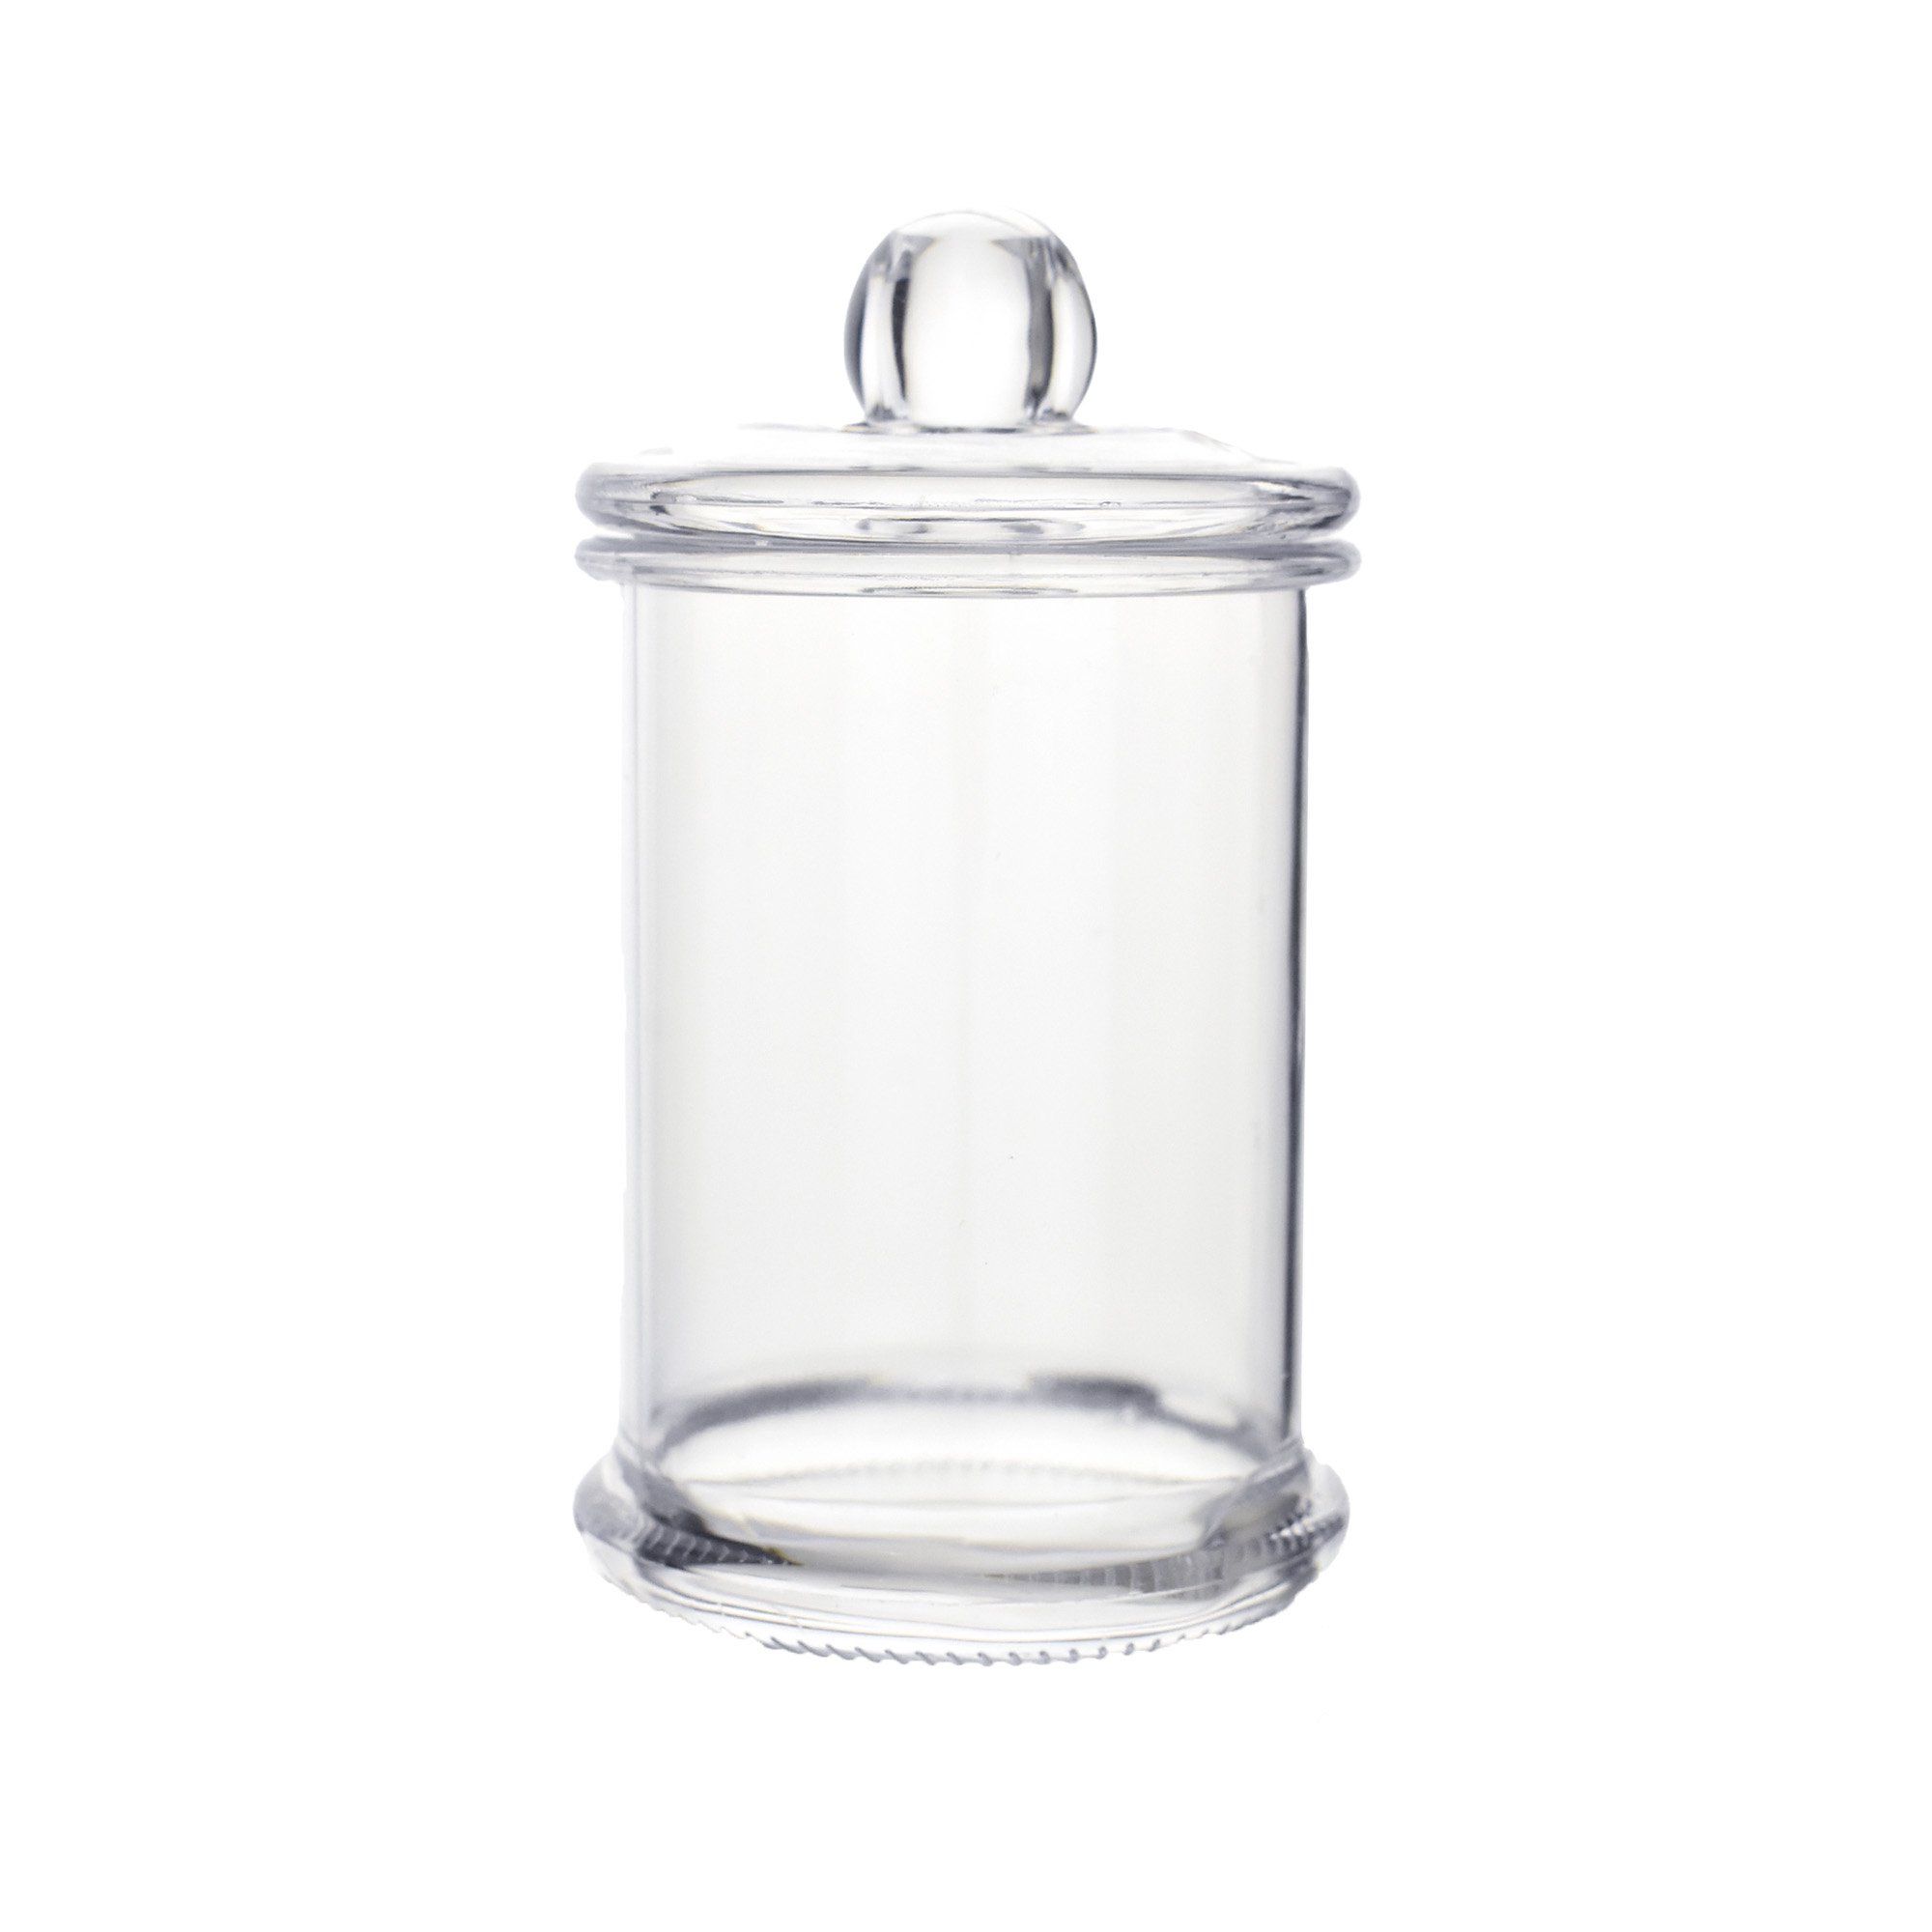 Clear Acrylic Apothecary Candy Jar, 4-Inch, 3-Count | Walmart (US)